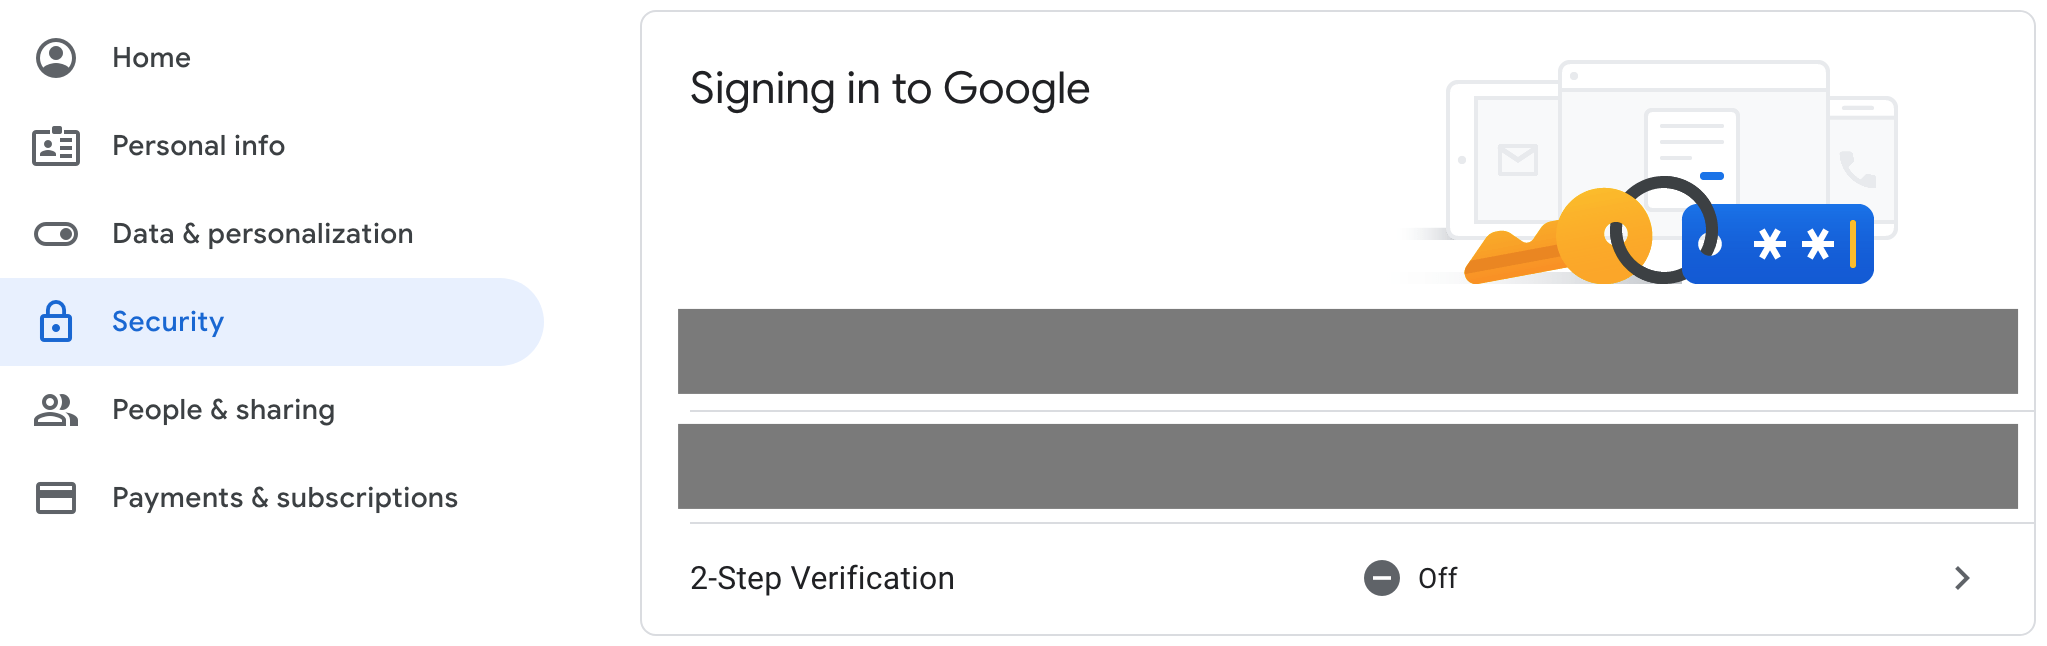 screen showing Gmail 2-Step Verification setting